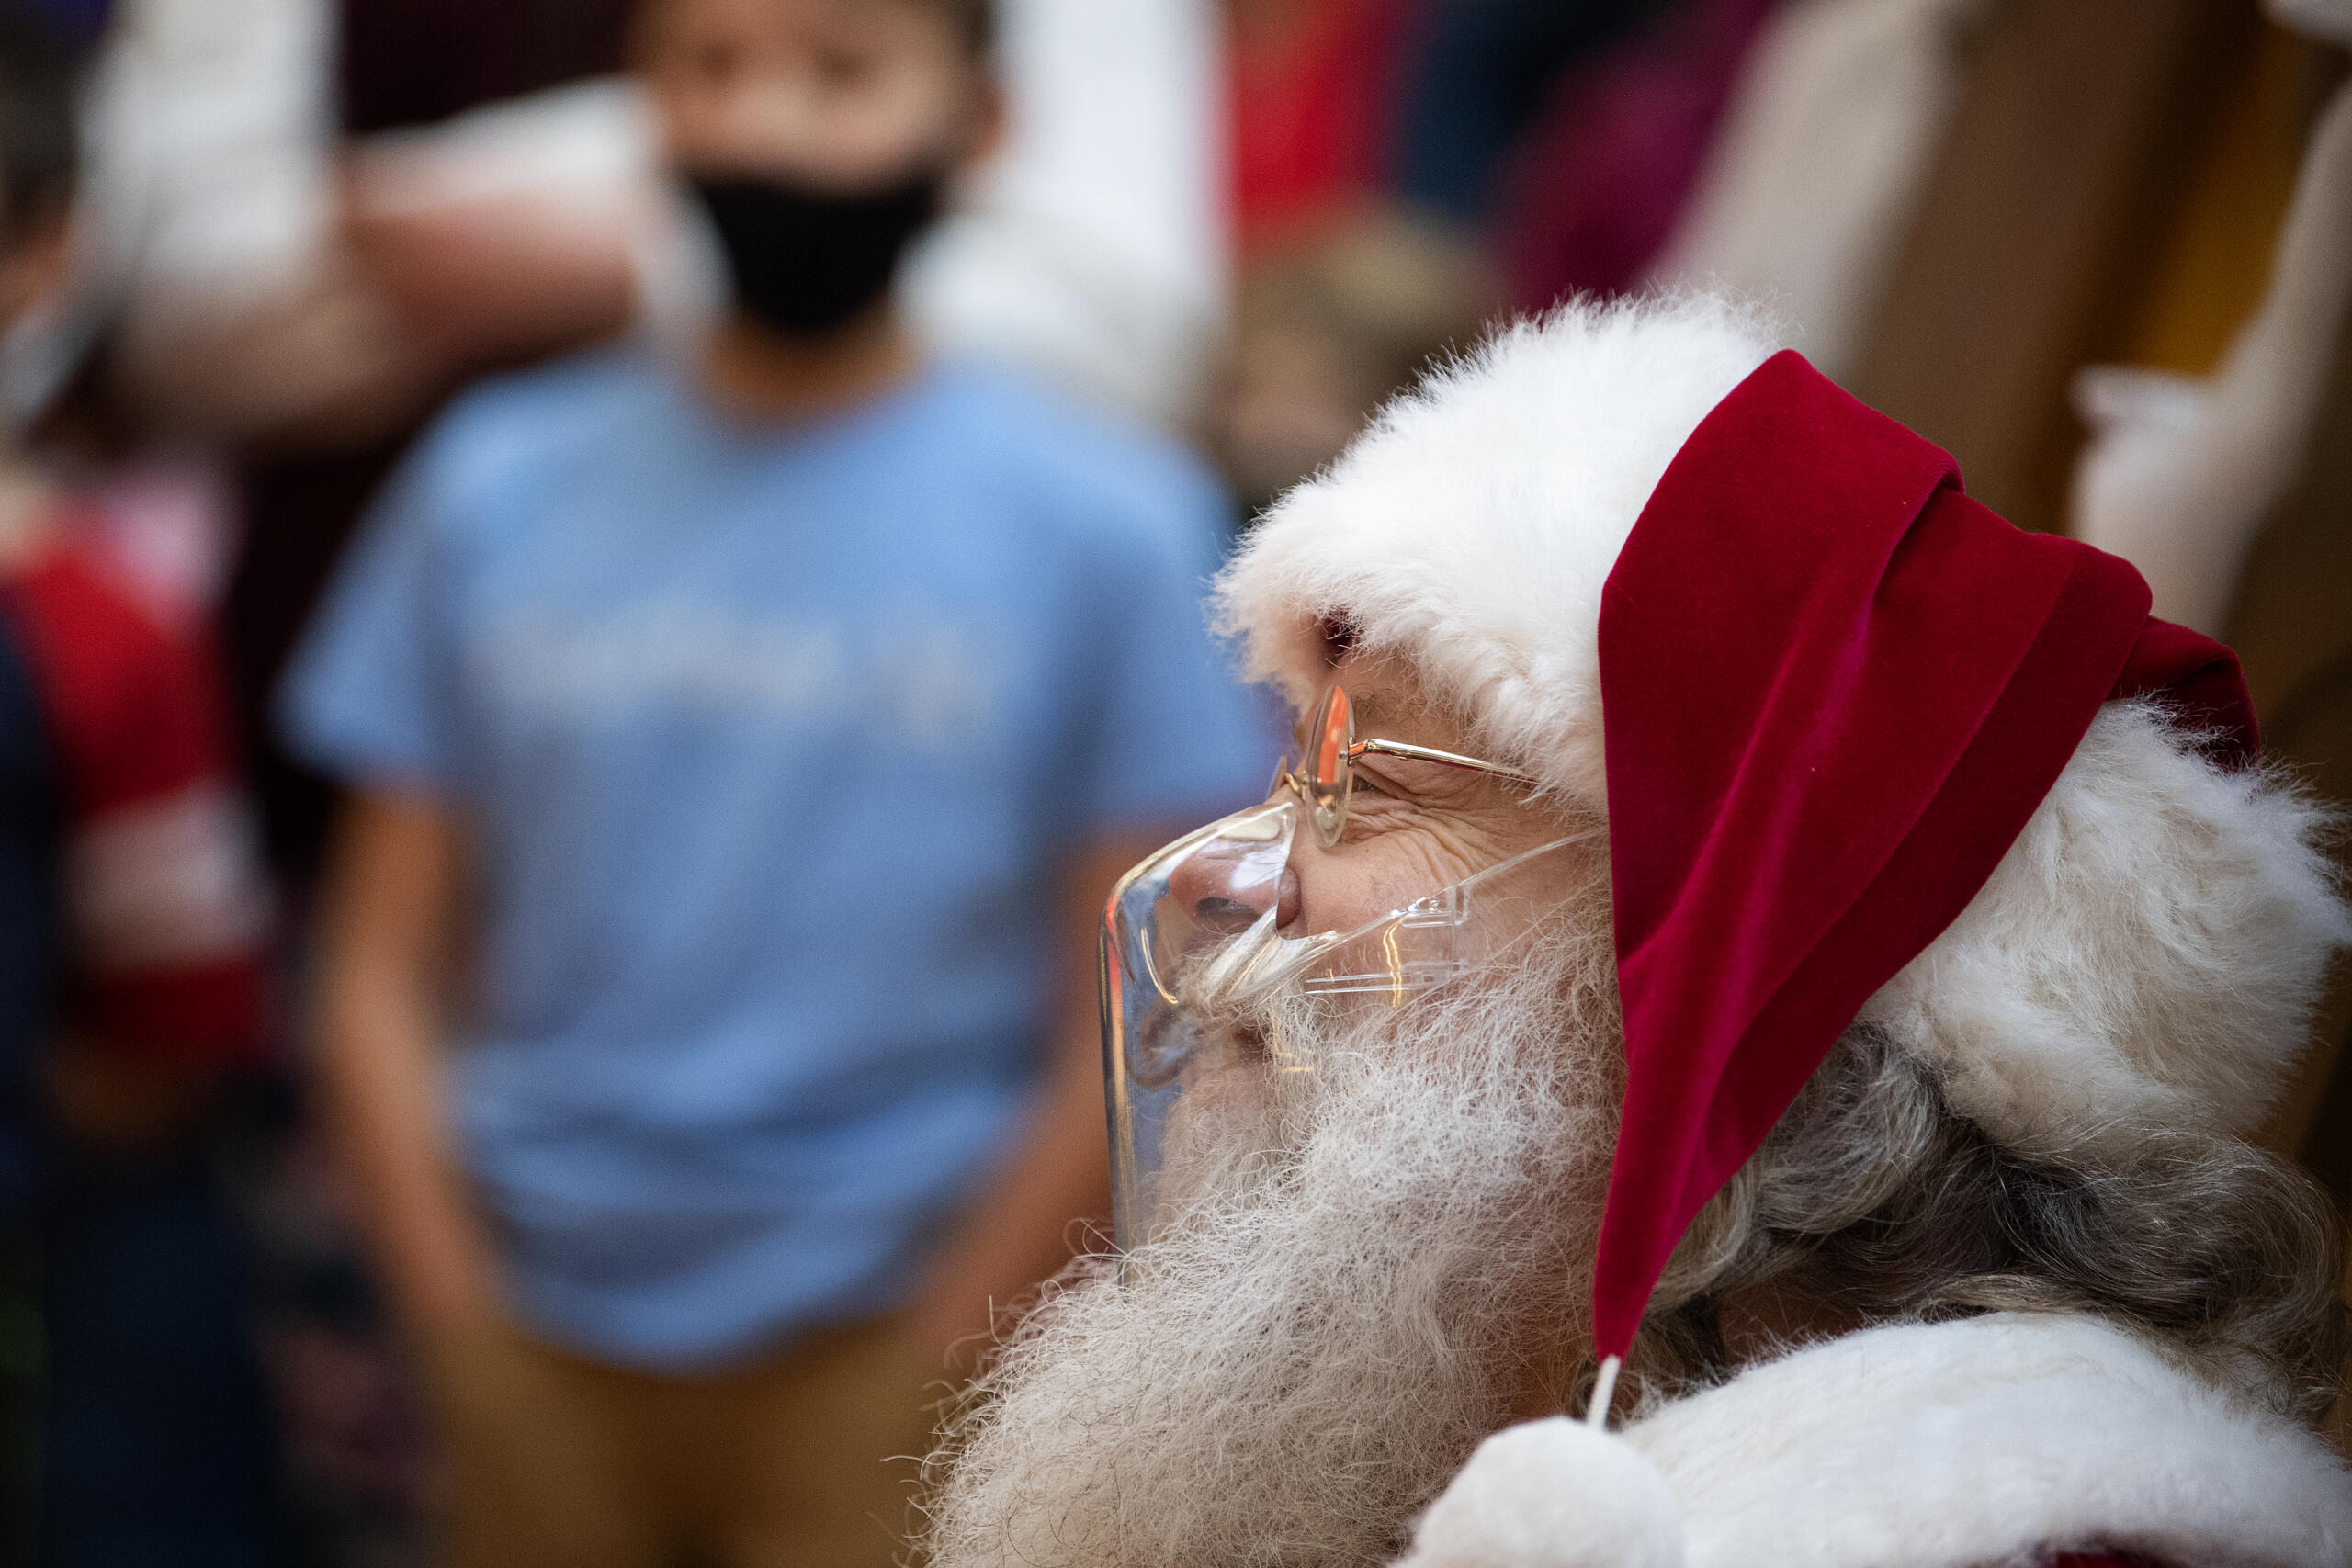 Santa Claus, as portrayed by Tom High, wears a clear, acrylic mask as a COVID-19 precaution while greeting kids of all ages at Vancouver Mall on Friday afternoon, Dec. 24, 2021.